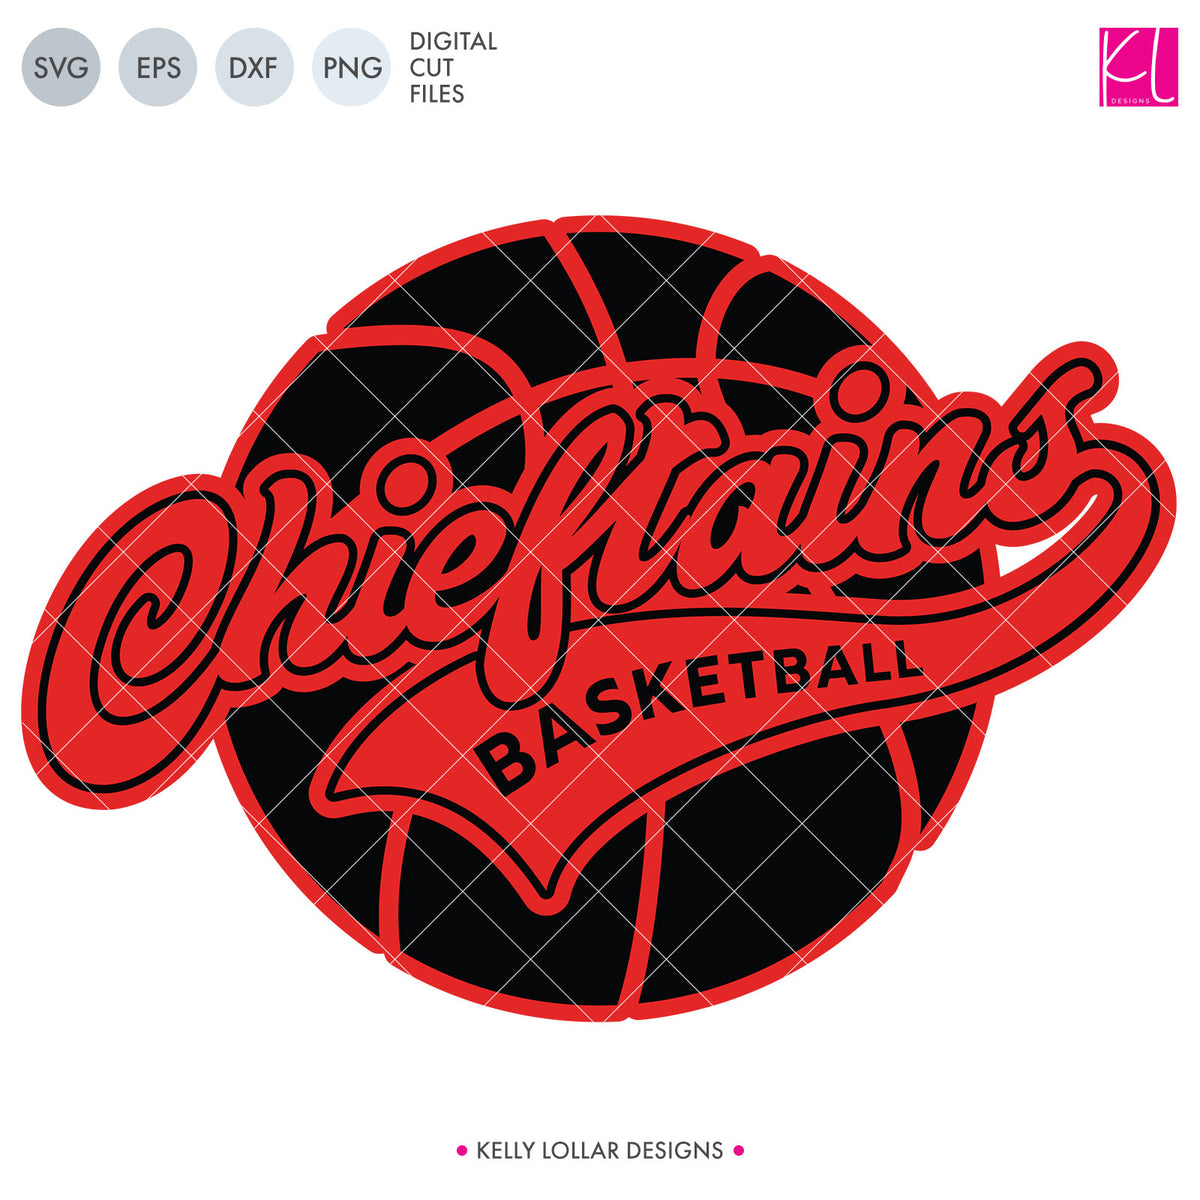 Chieftains Basketball Bundle | SVG DXF EPS PNG Cut Files